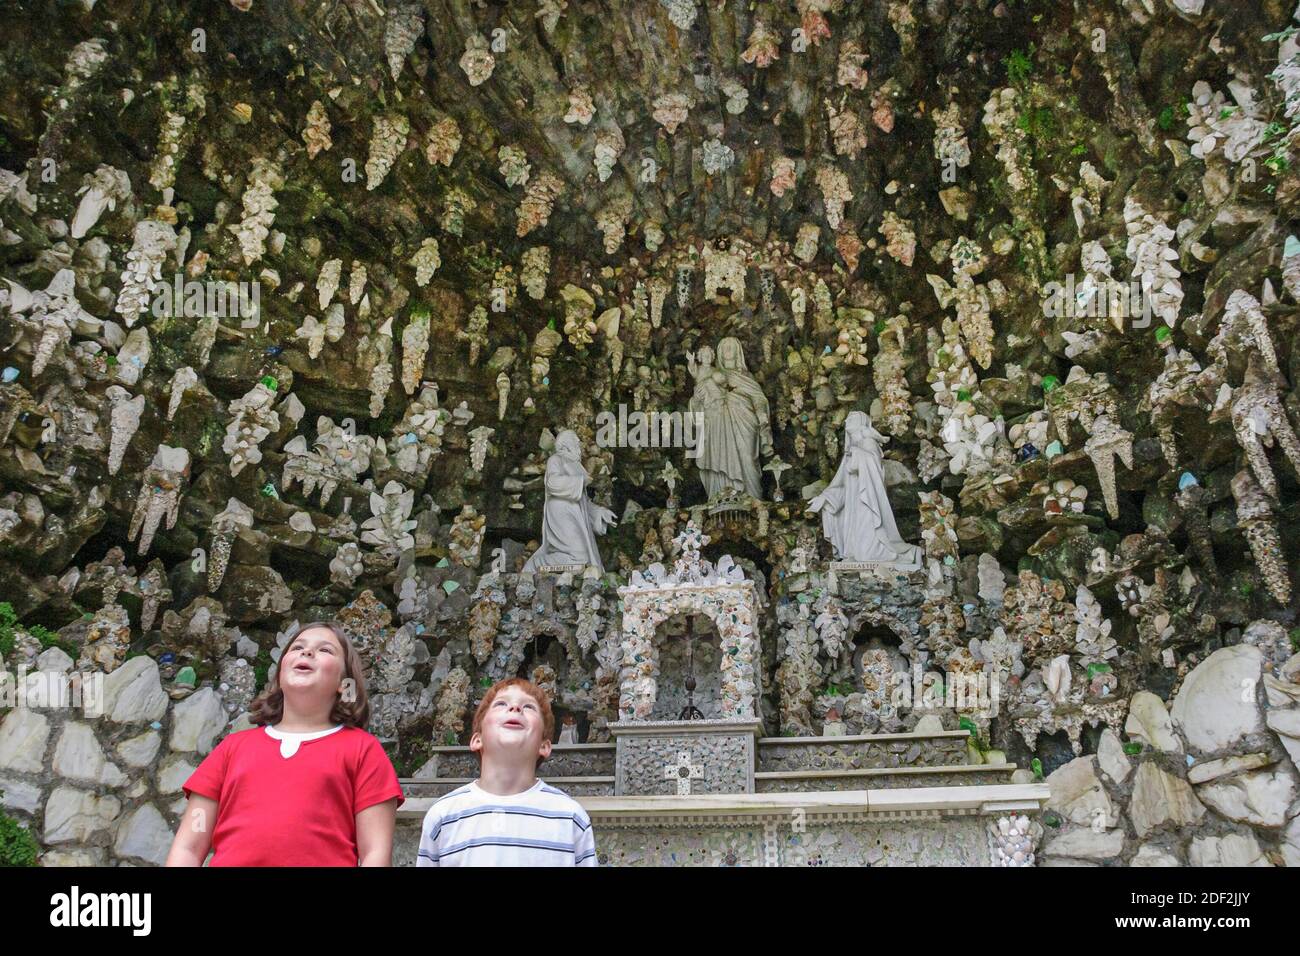 Alabama Cullman Ave Maria Grotto,miniature replicas biblical structures world famous buildings,grotto boys girl looks looking, Stock Photo